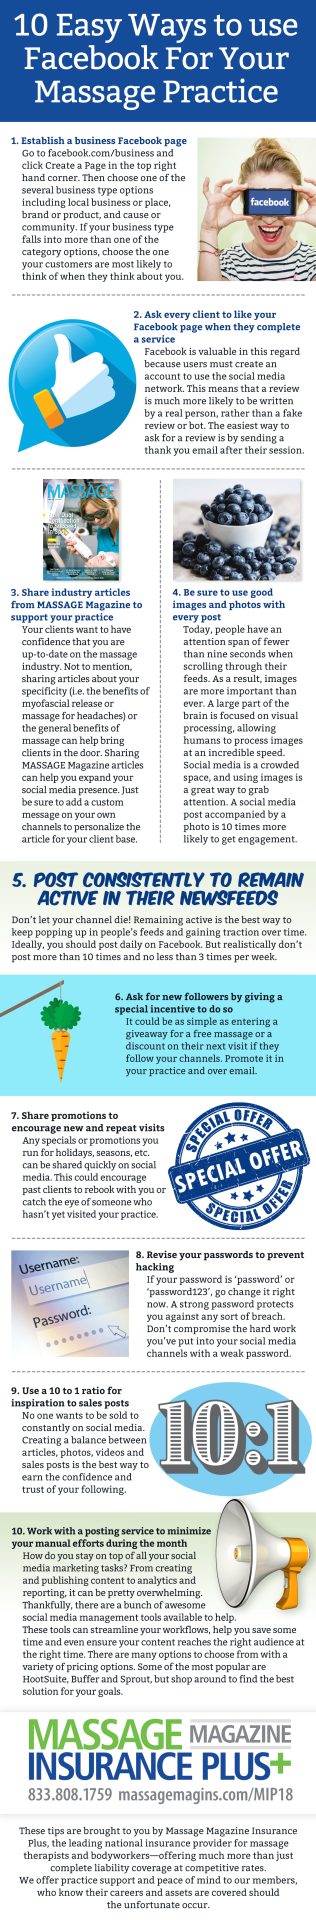 But where to do you start when building a massage Facebook page? Here are 10 quick and easy ways to get started.